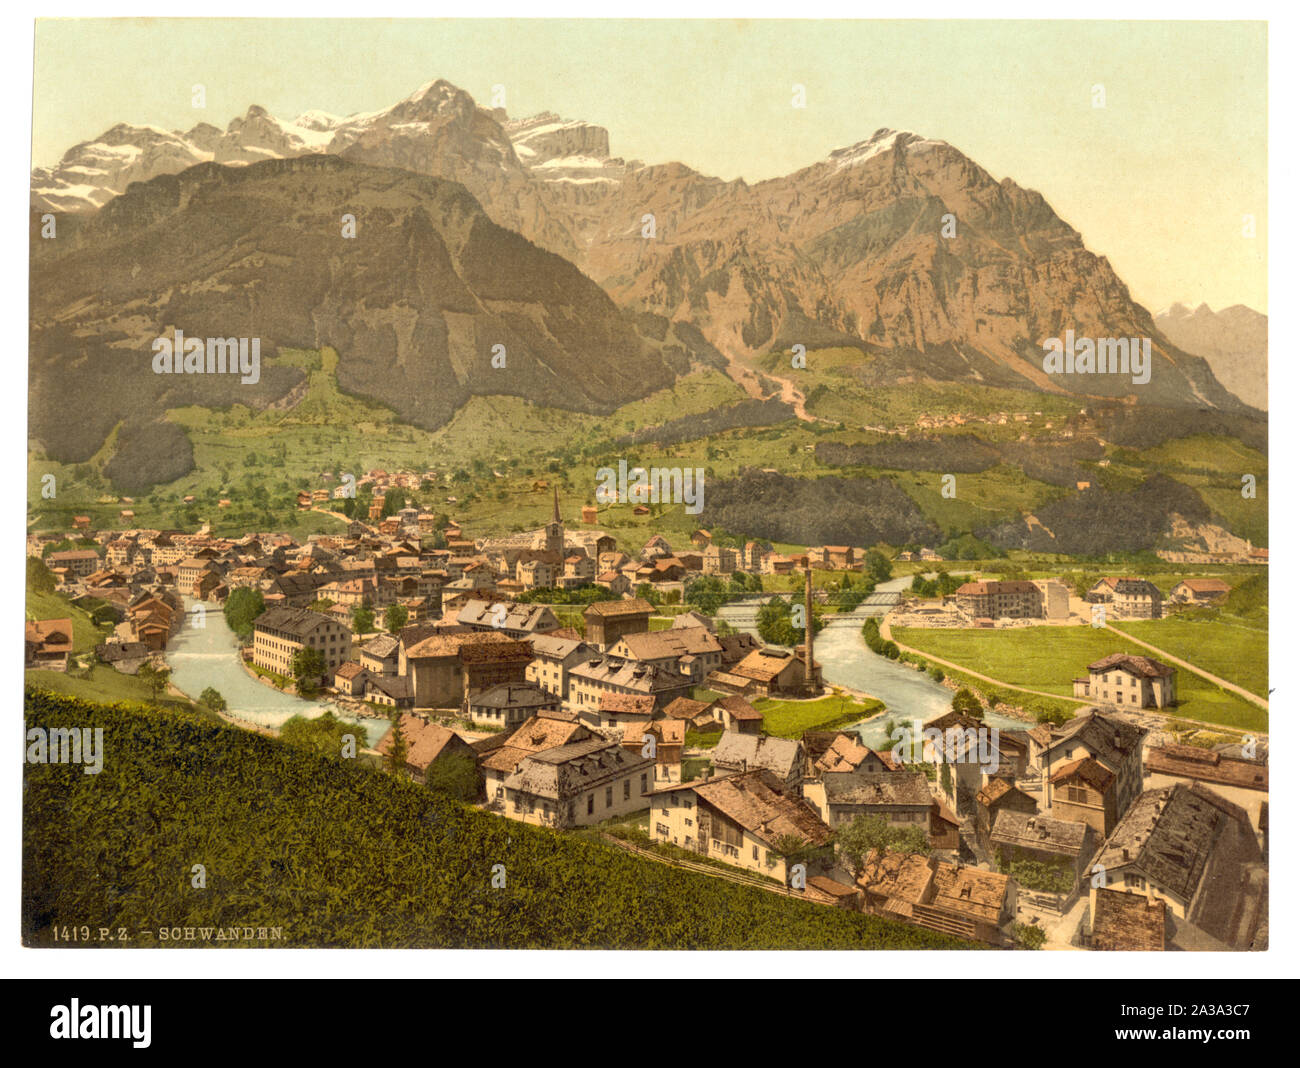 Schwanden, Glarus, Switzerland; Forms part of: Views of Switzerland in the Photochrom print collection.; Title devised by Library staff.; Print no. 1419.; Stock Photo